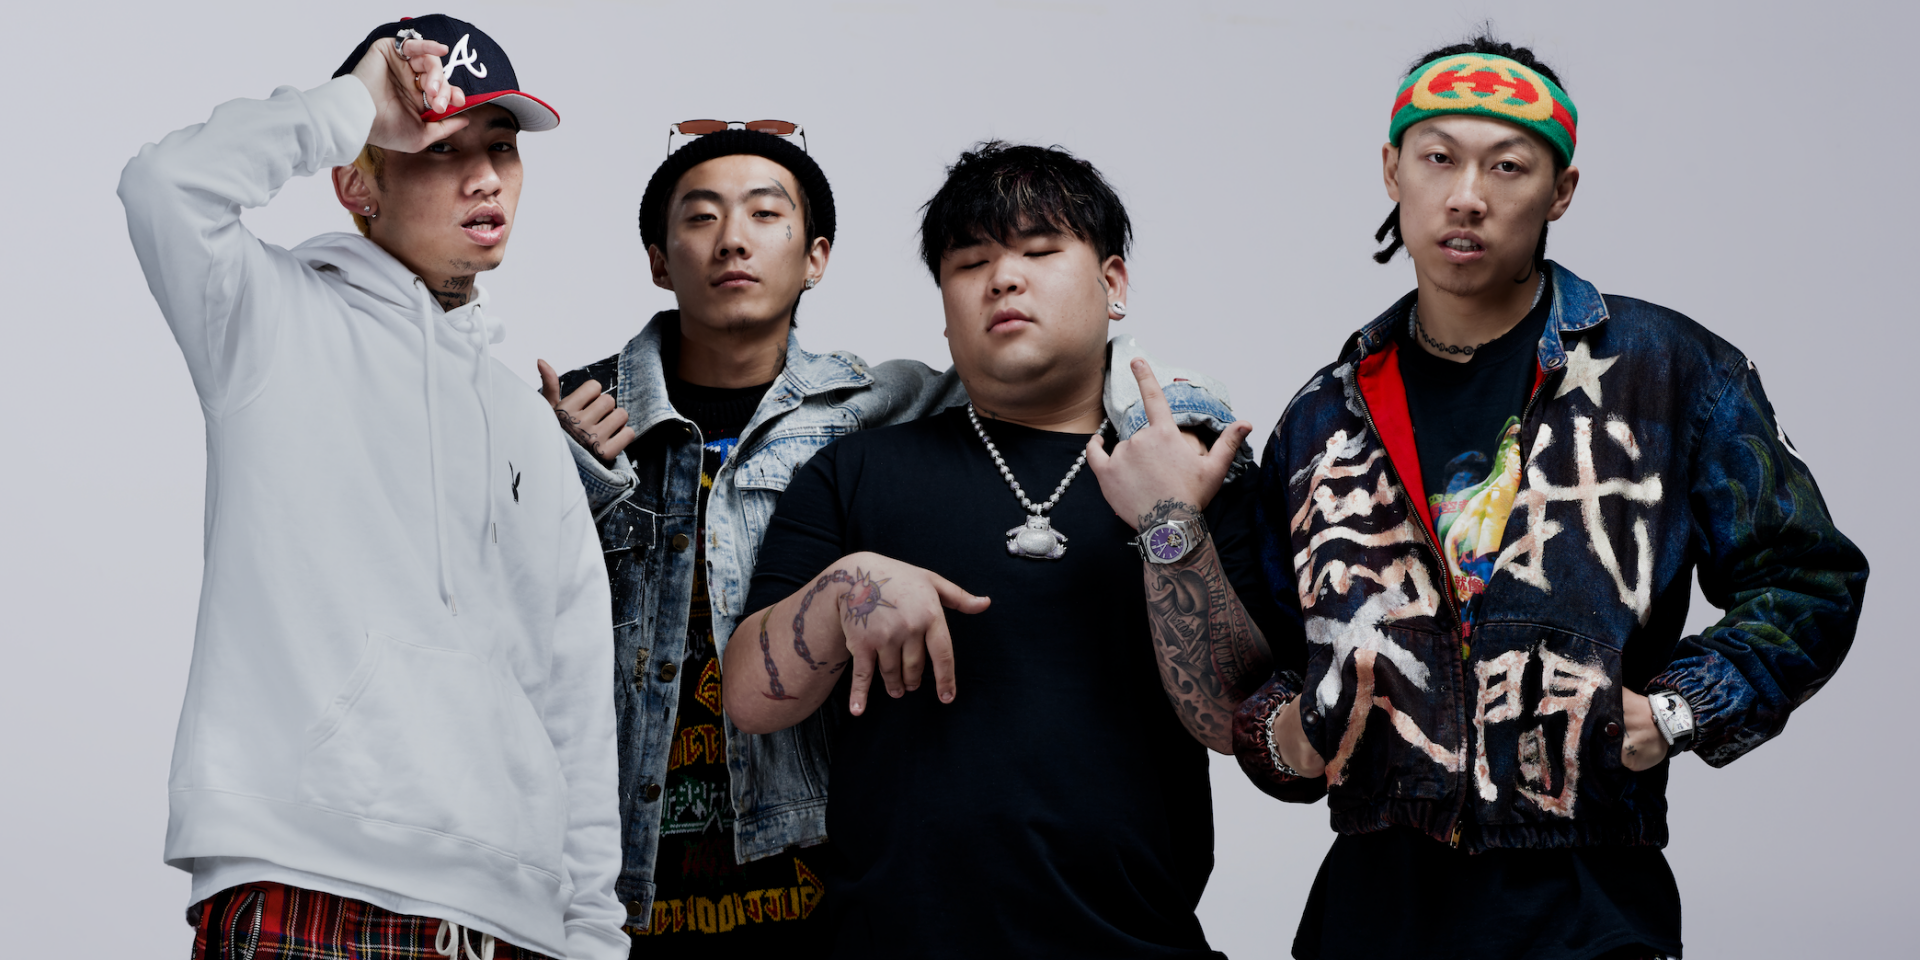 "Language barriers will always exist but music speaks louder than words": An interview with Higher Brothers